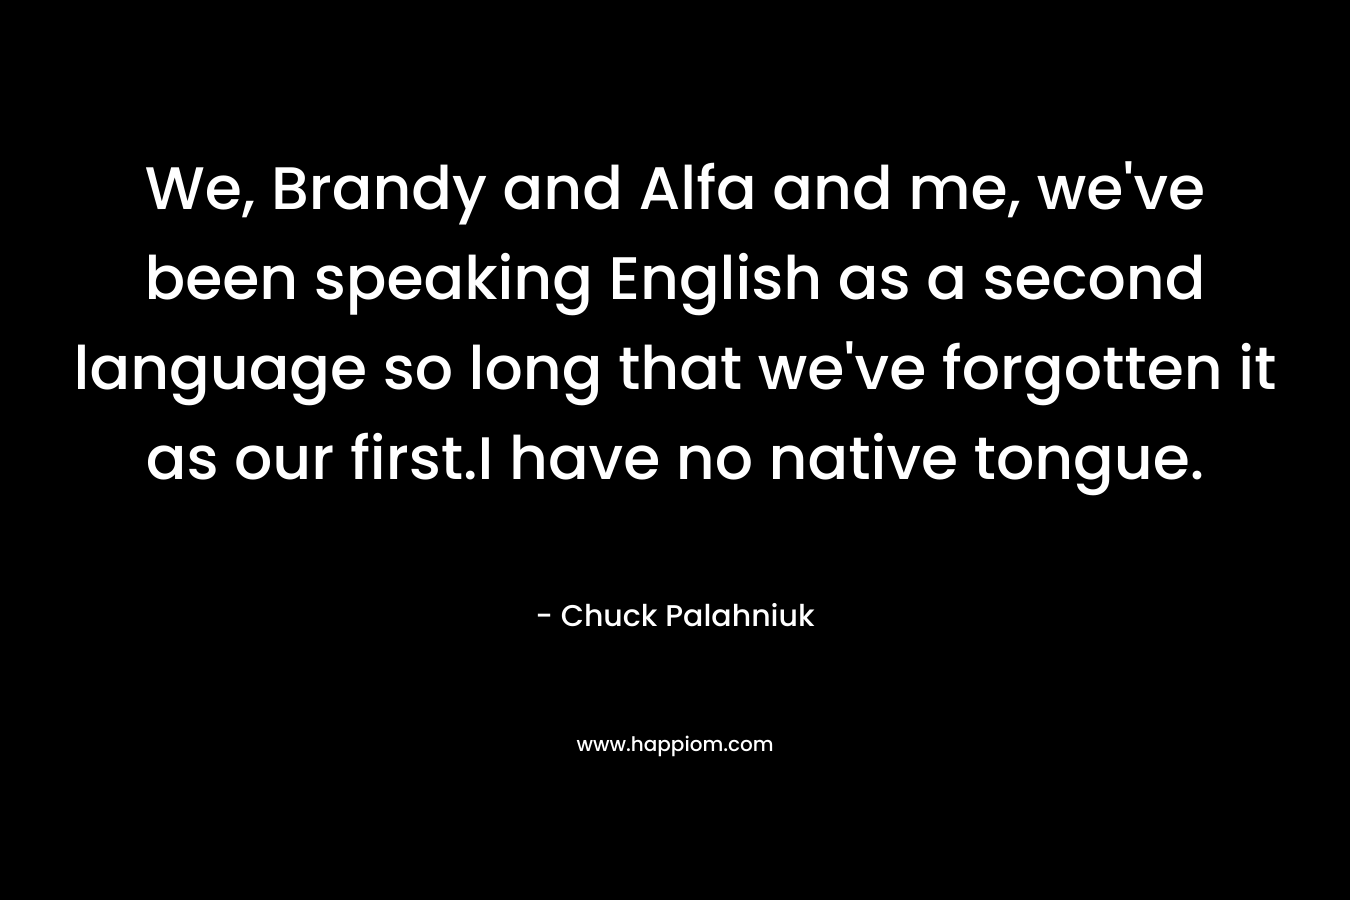 We, Brandy and Alfa and me, we've been speaking English as a second language so long that we've forgotten it as our first.I have no native tongue.